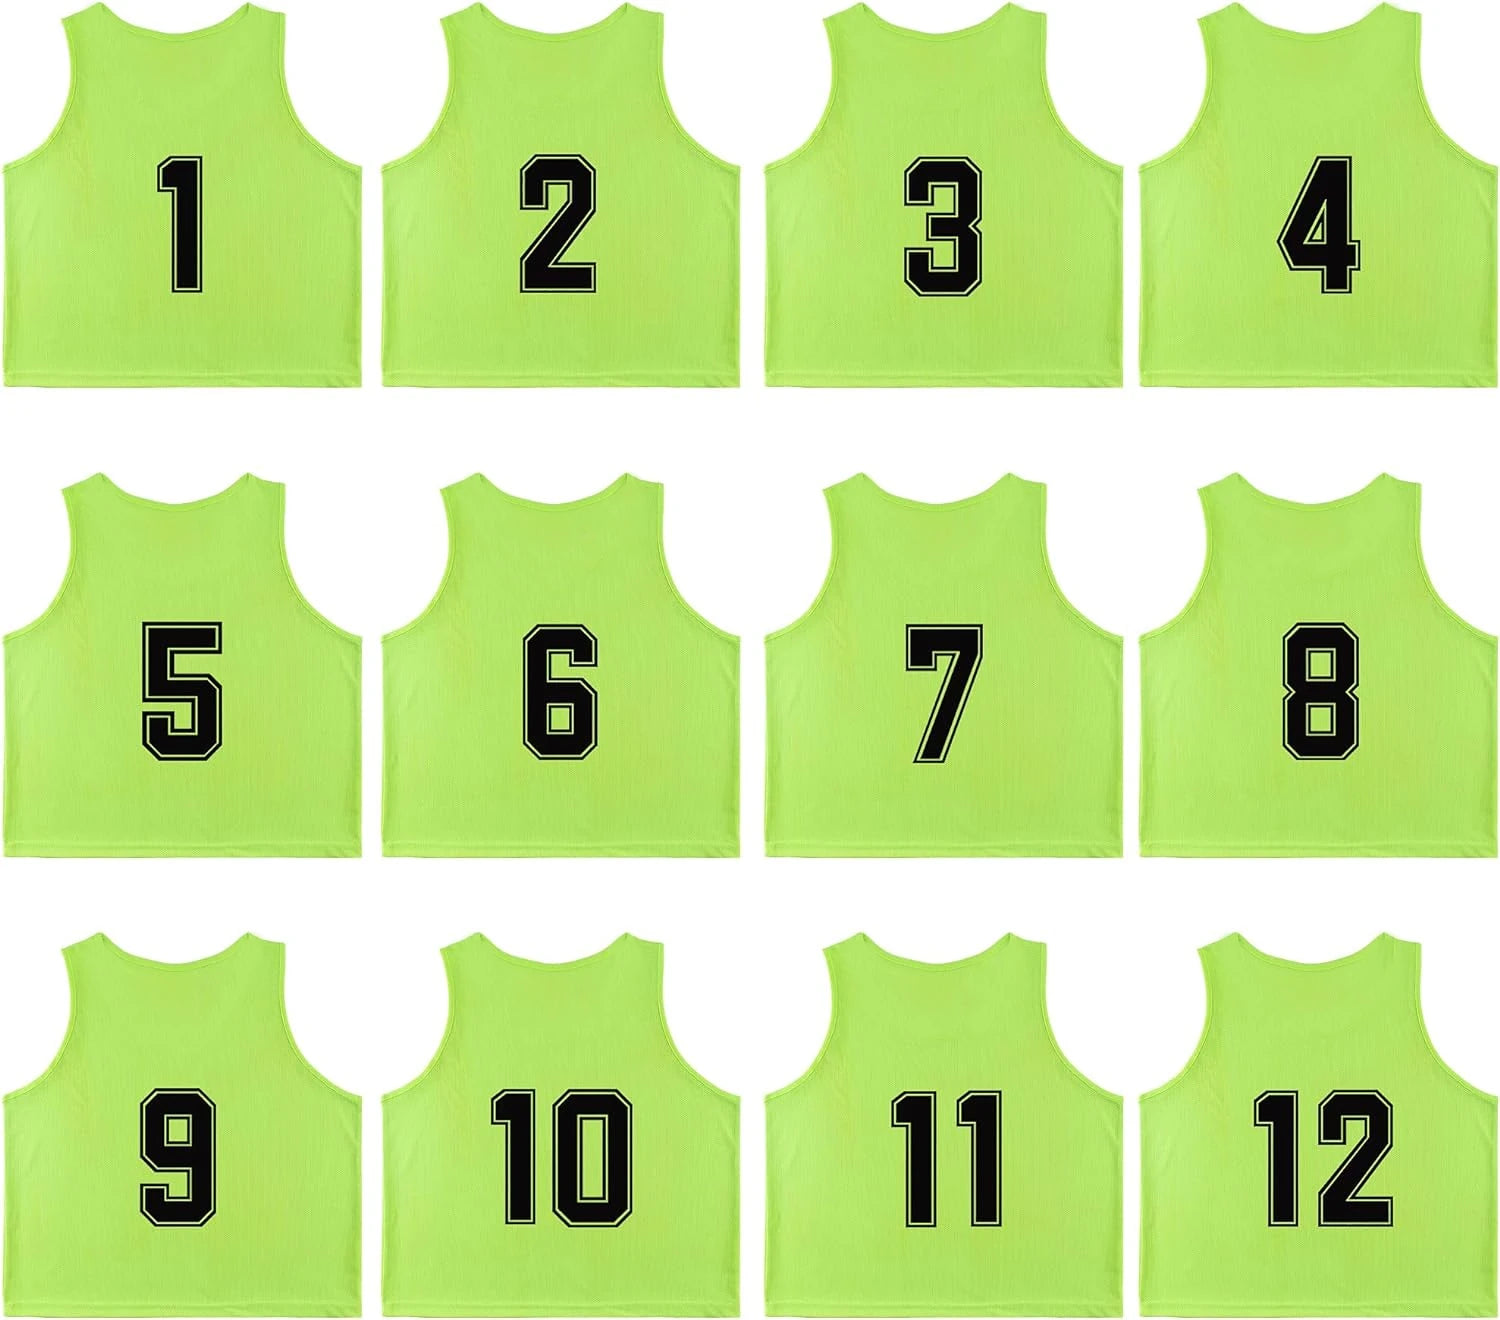 Tych3L 12 Pack of Numbered Jersey Bibs Scrimmage Training Vests for all sizes.